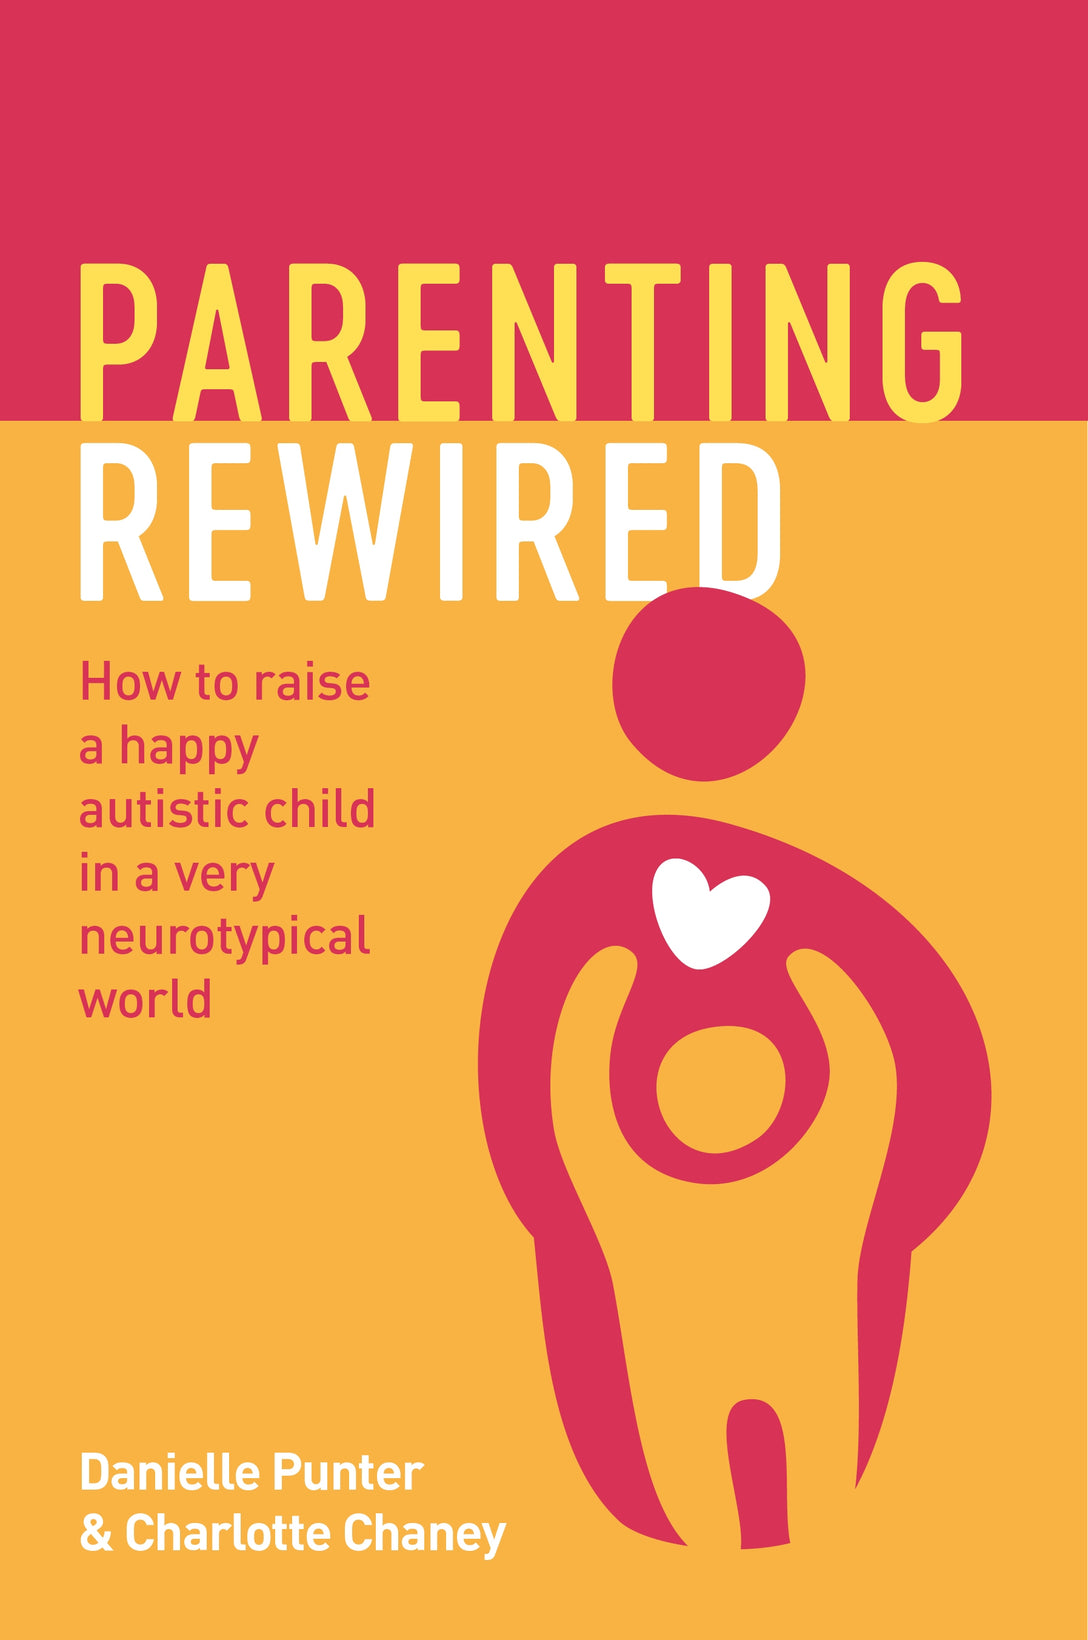 Parenting Rewired by Danielle Punter, Charlotte Chaney